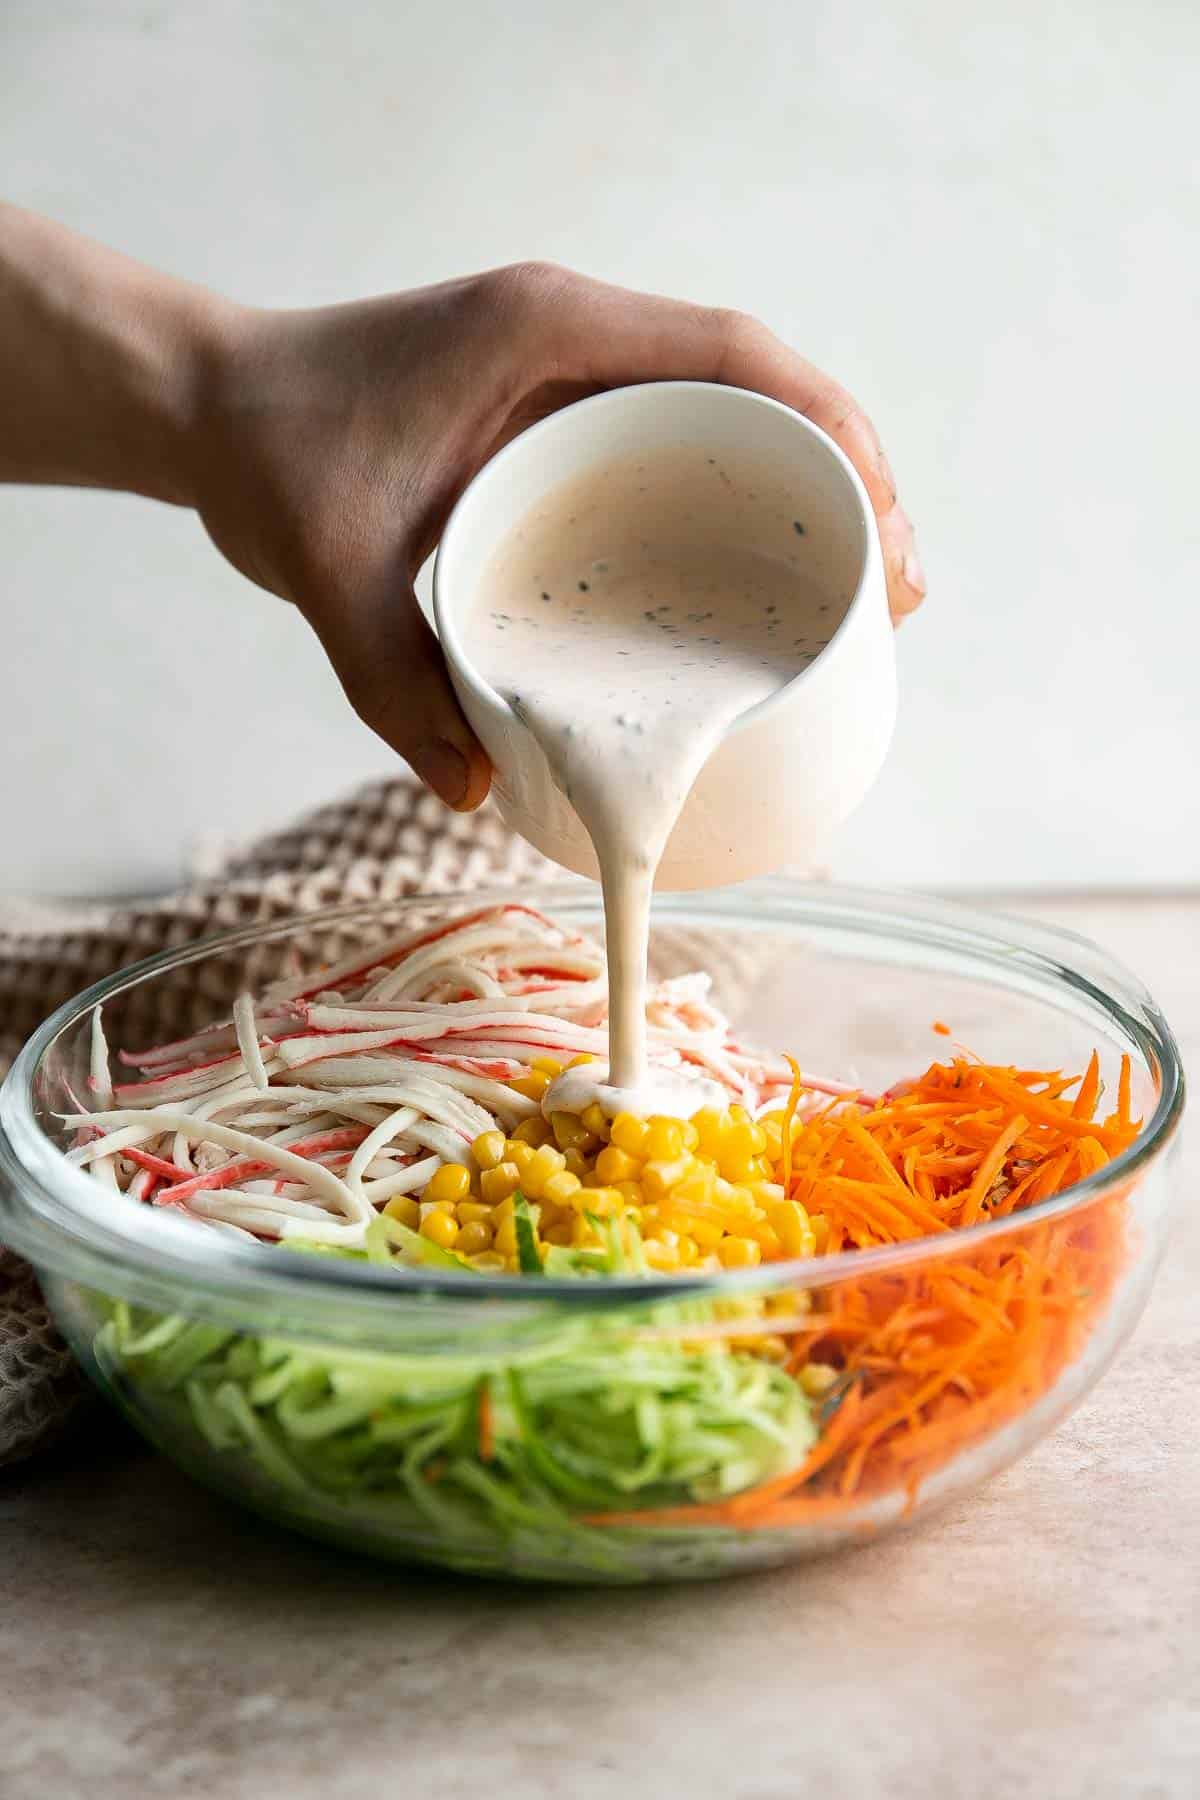 Kani Salad is loaded with thin strips of crab, julienned vegetables, and a creamy mayo dressing (which can be made spicy for a Spicy Kani Salad). | aheadofthyme.com